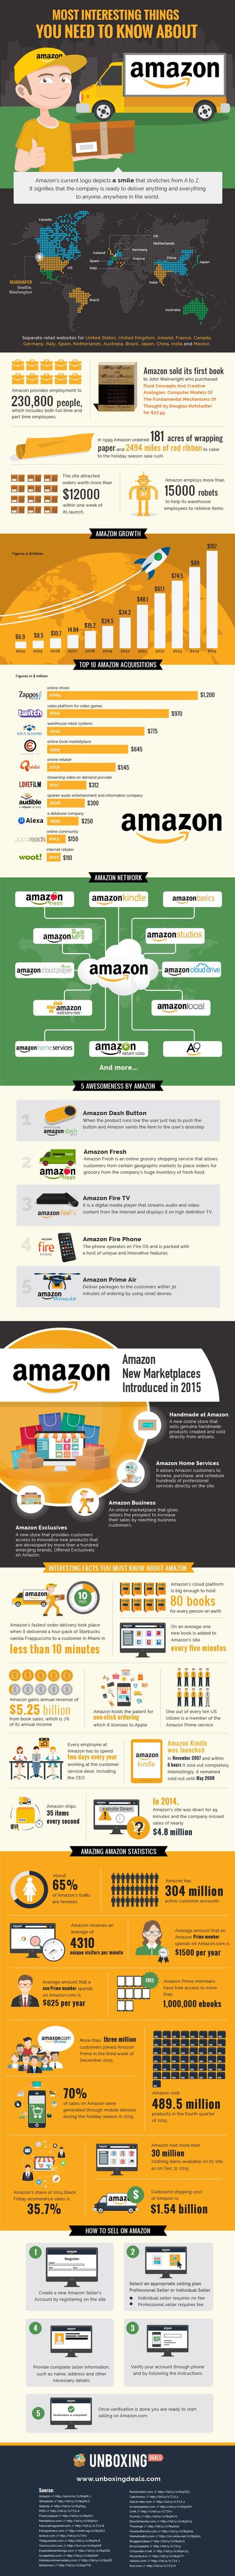 amazon-interesting-facts-about-infographic